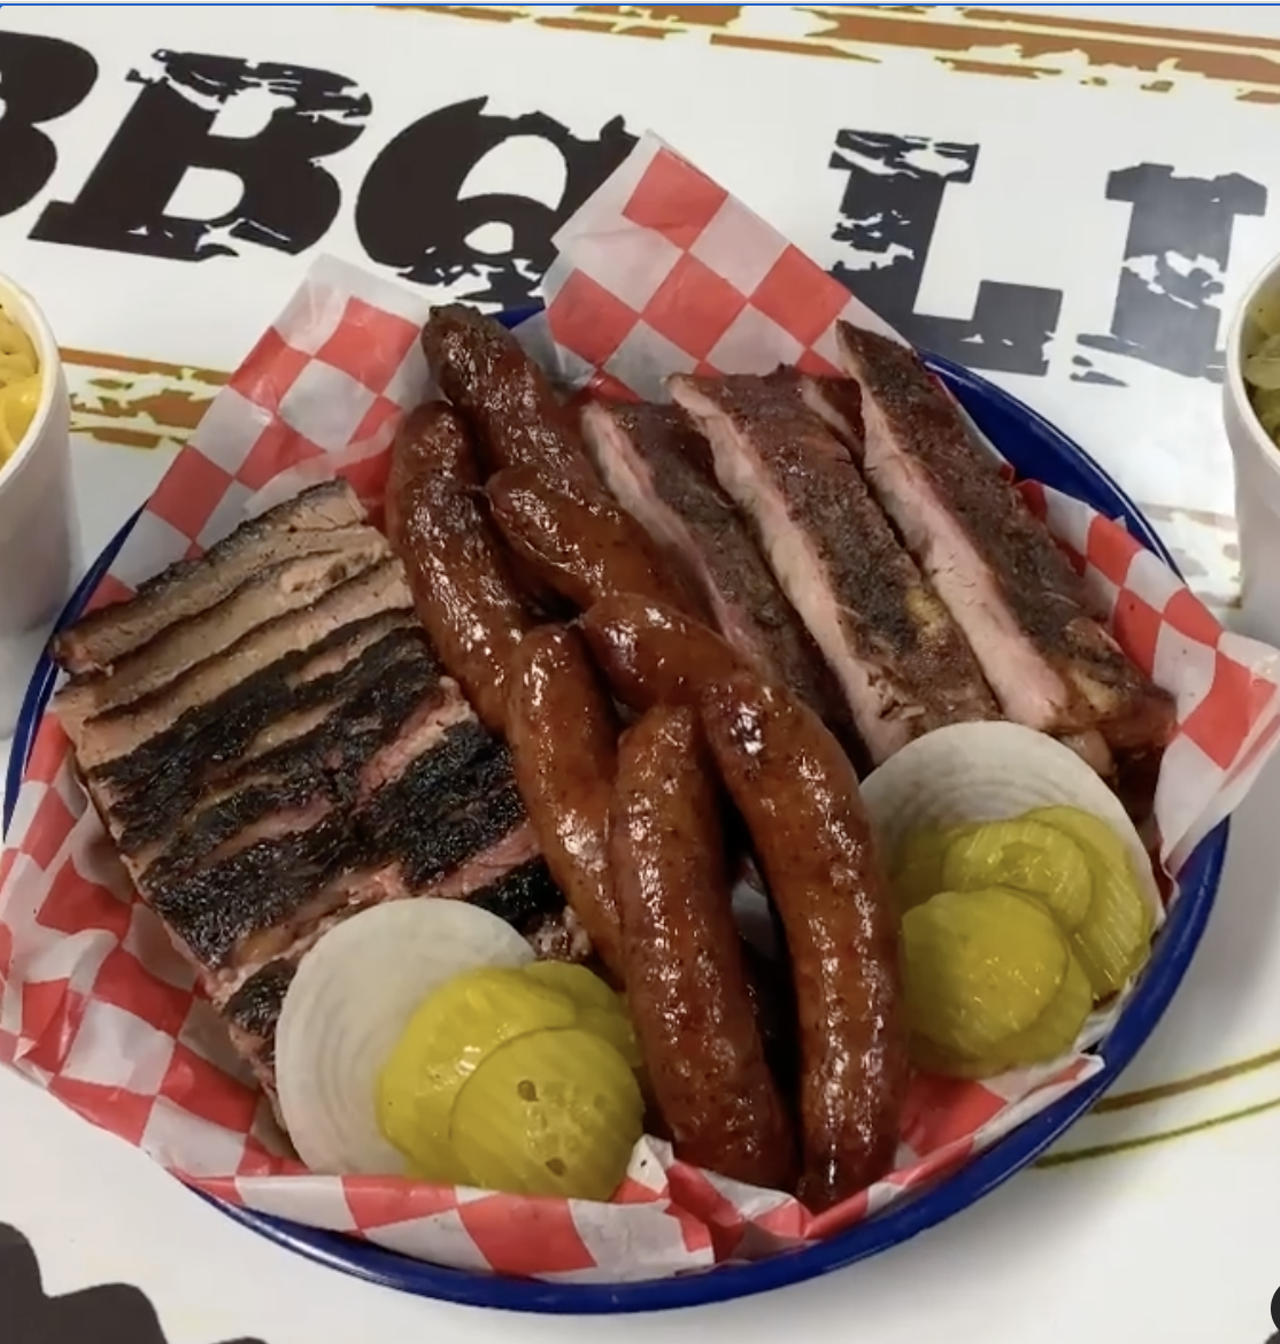 BBQLIFE By Chris
902 S WW White Rd, (210) 359-1511, facebook.com/bbqlifebychris
Every Alamo City resident has their “go-to” BBQ joint, but there’s no shame in trying something new every once in a while. Located in a former Sonic drive-thru, BBQLife By Chris offers a simple yet satisfying barbecue. From fall-off-the-bone slow-smoked ribs to some classic texas brisket, try this spot once, and it may just become your new favorite. 
Photo via Instagram / bbqlifebychris